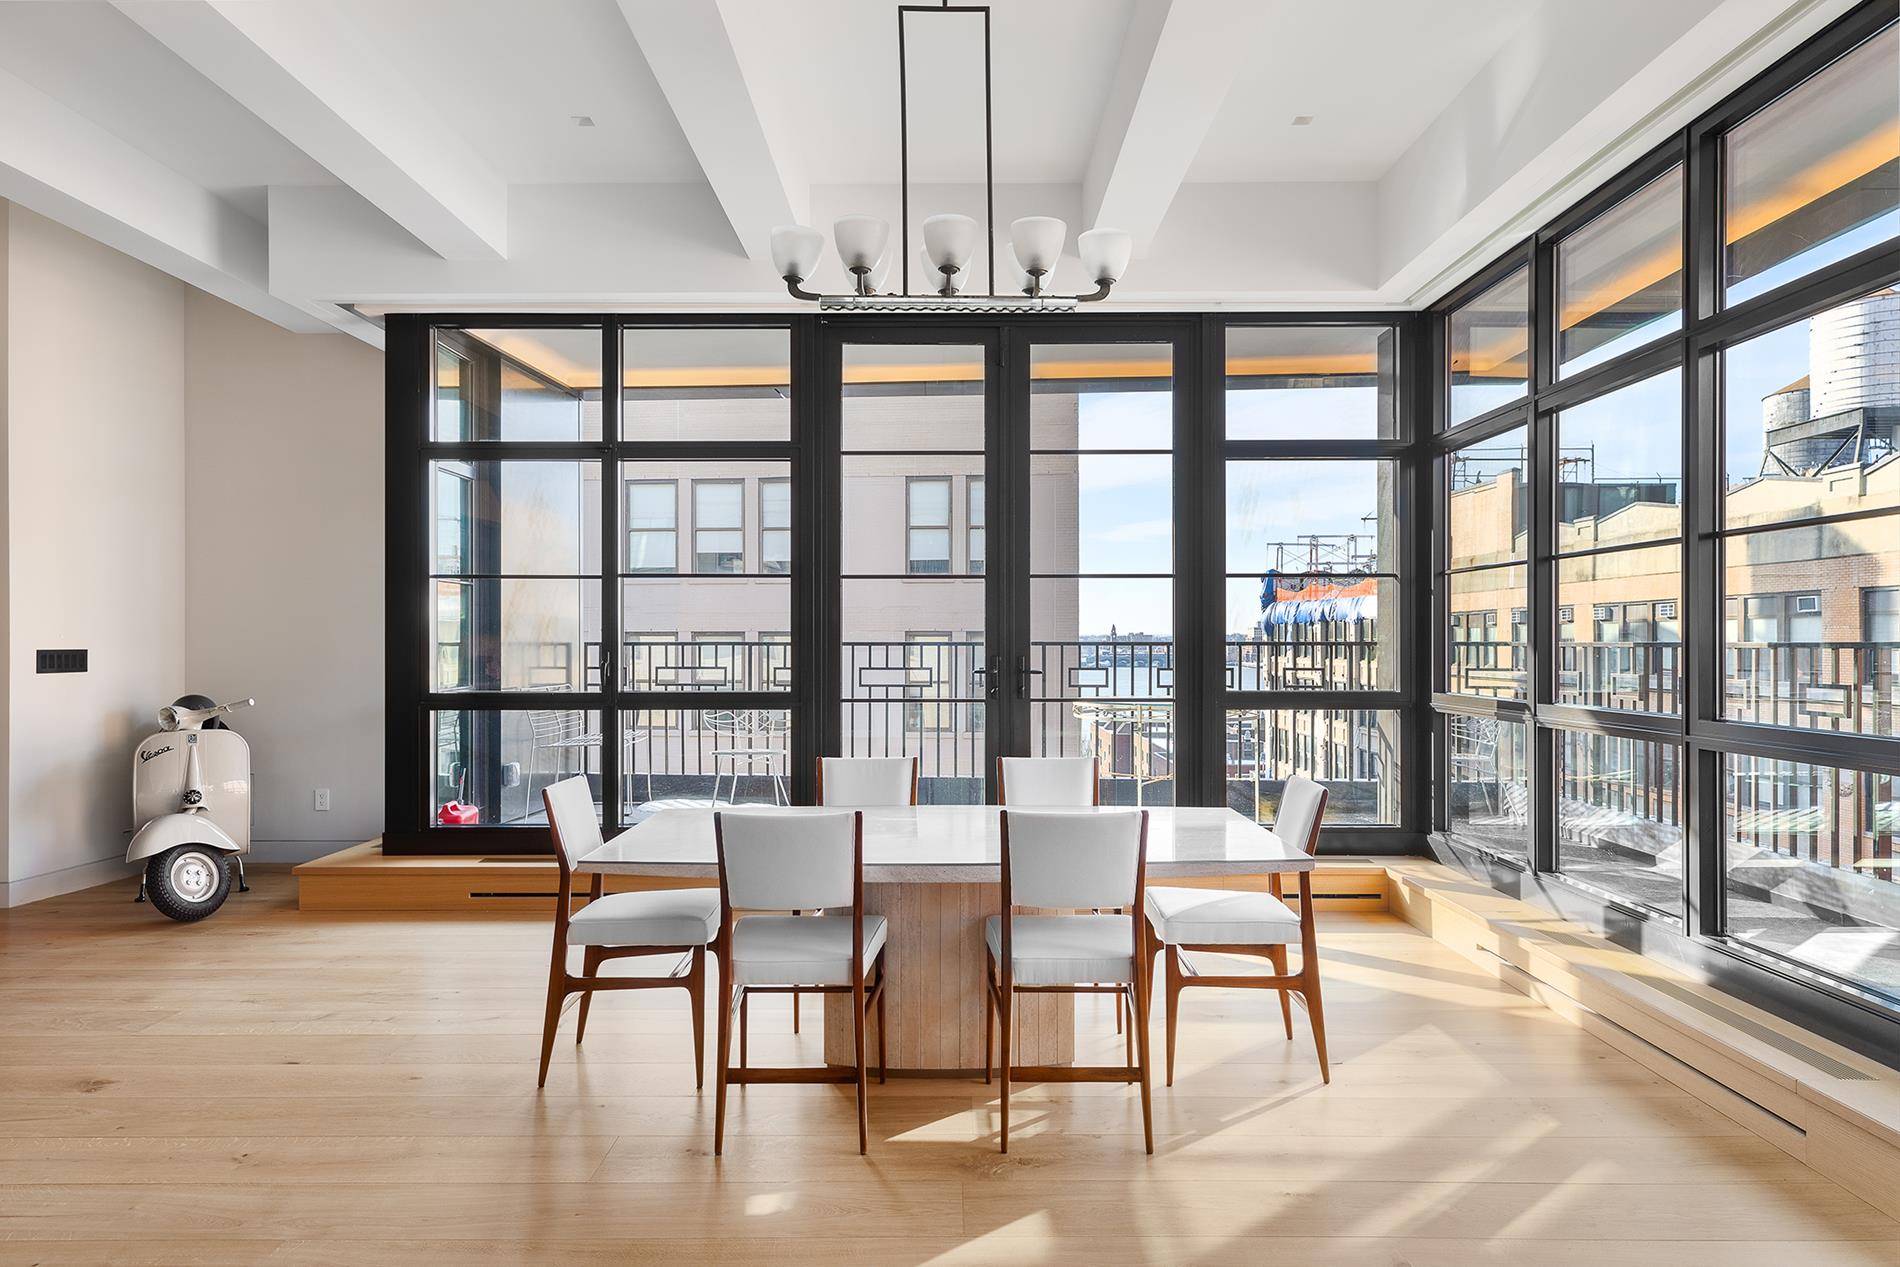 Incredible opportunity to purchase two separate homes with a combined total of 3146 square feet at the most coveted condominium project in the West Village.